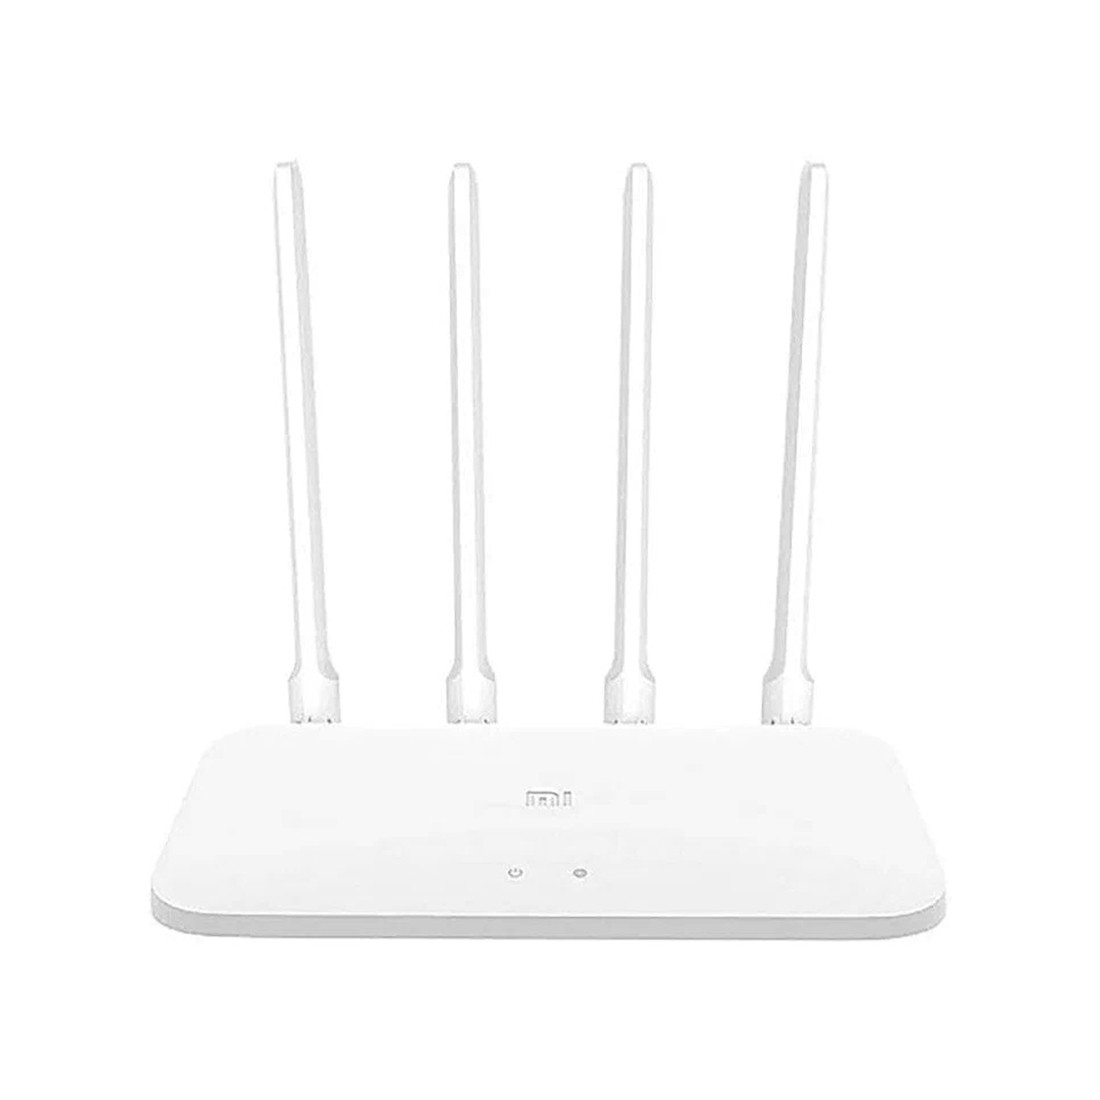 Маршрутизатор Wi-Fi AC1200 Xiaomi Router AC1200 - фото 2 - id-p114105100